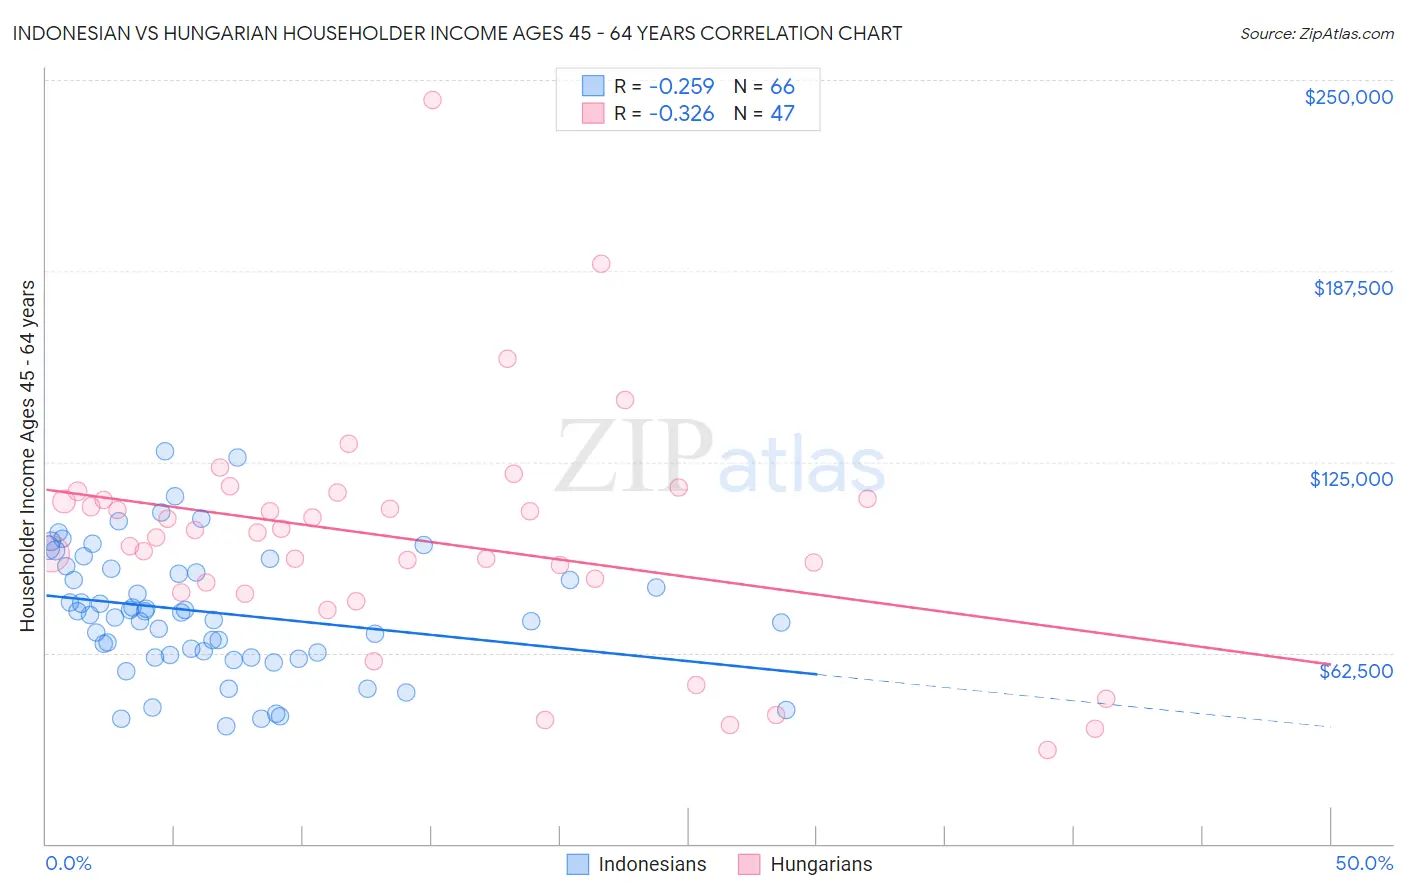 Indonesian vs Hungarian Householder Income Ages 45 - 64 years